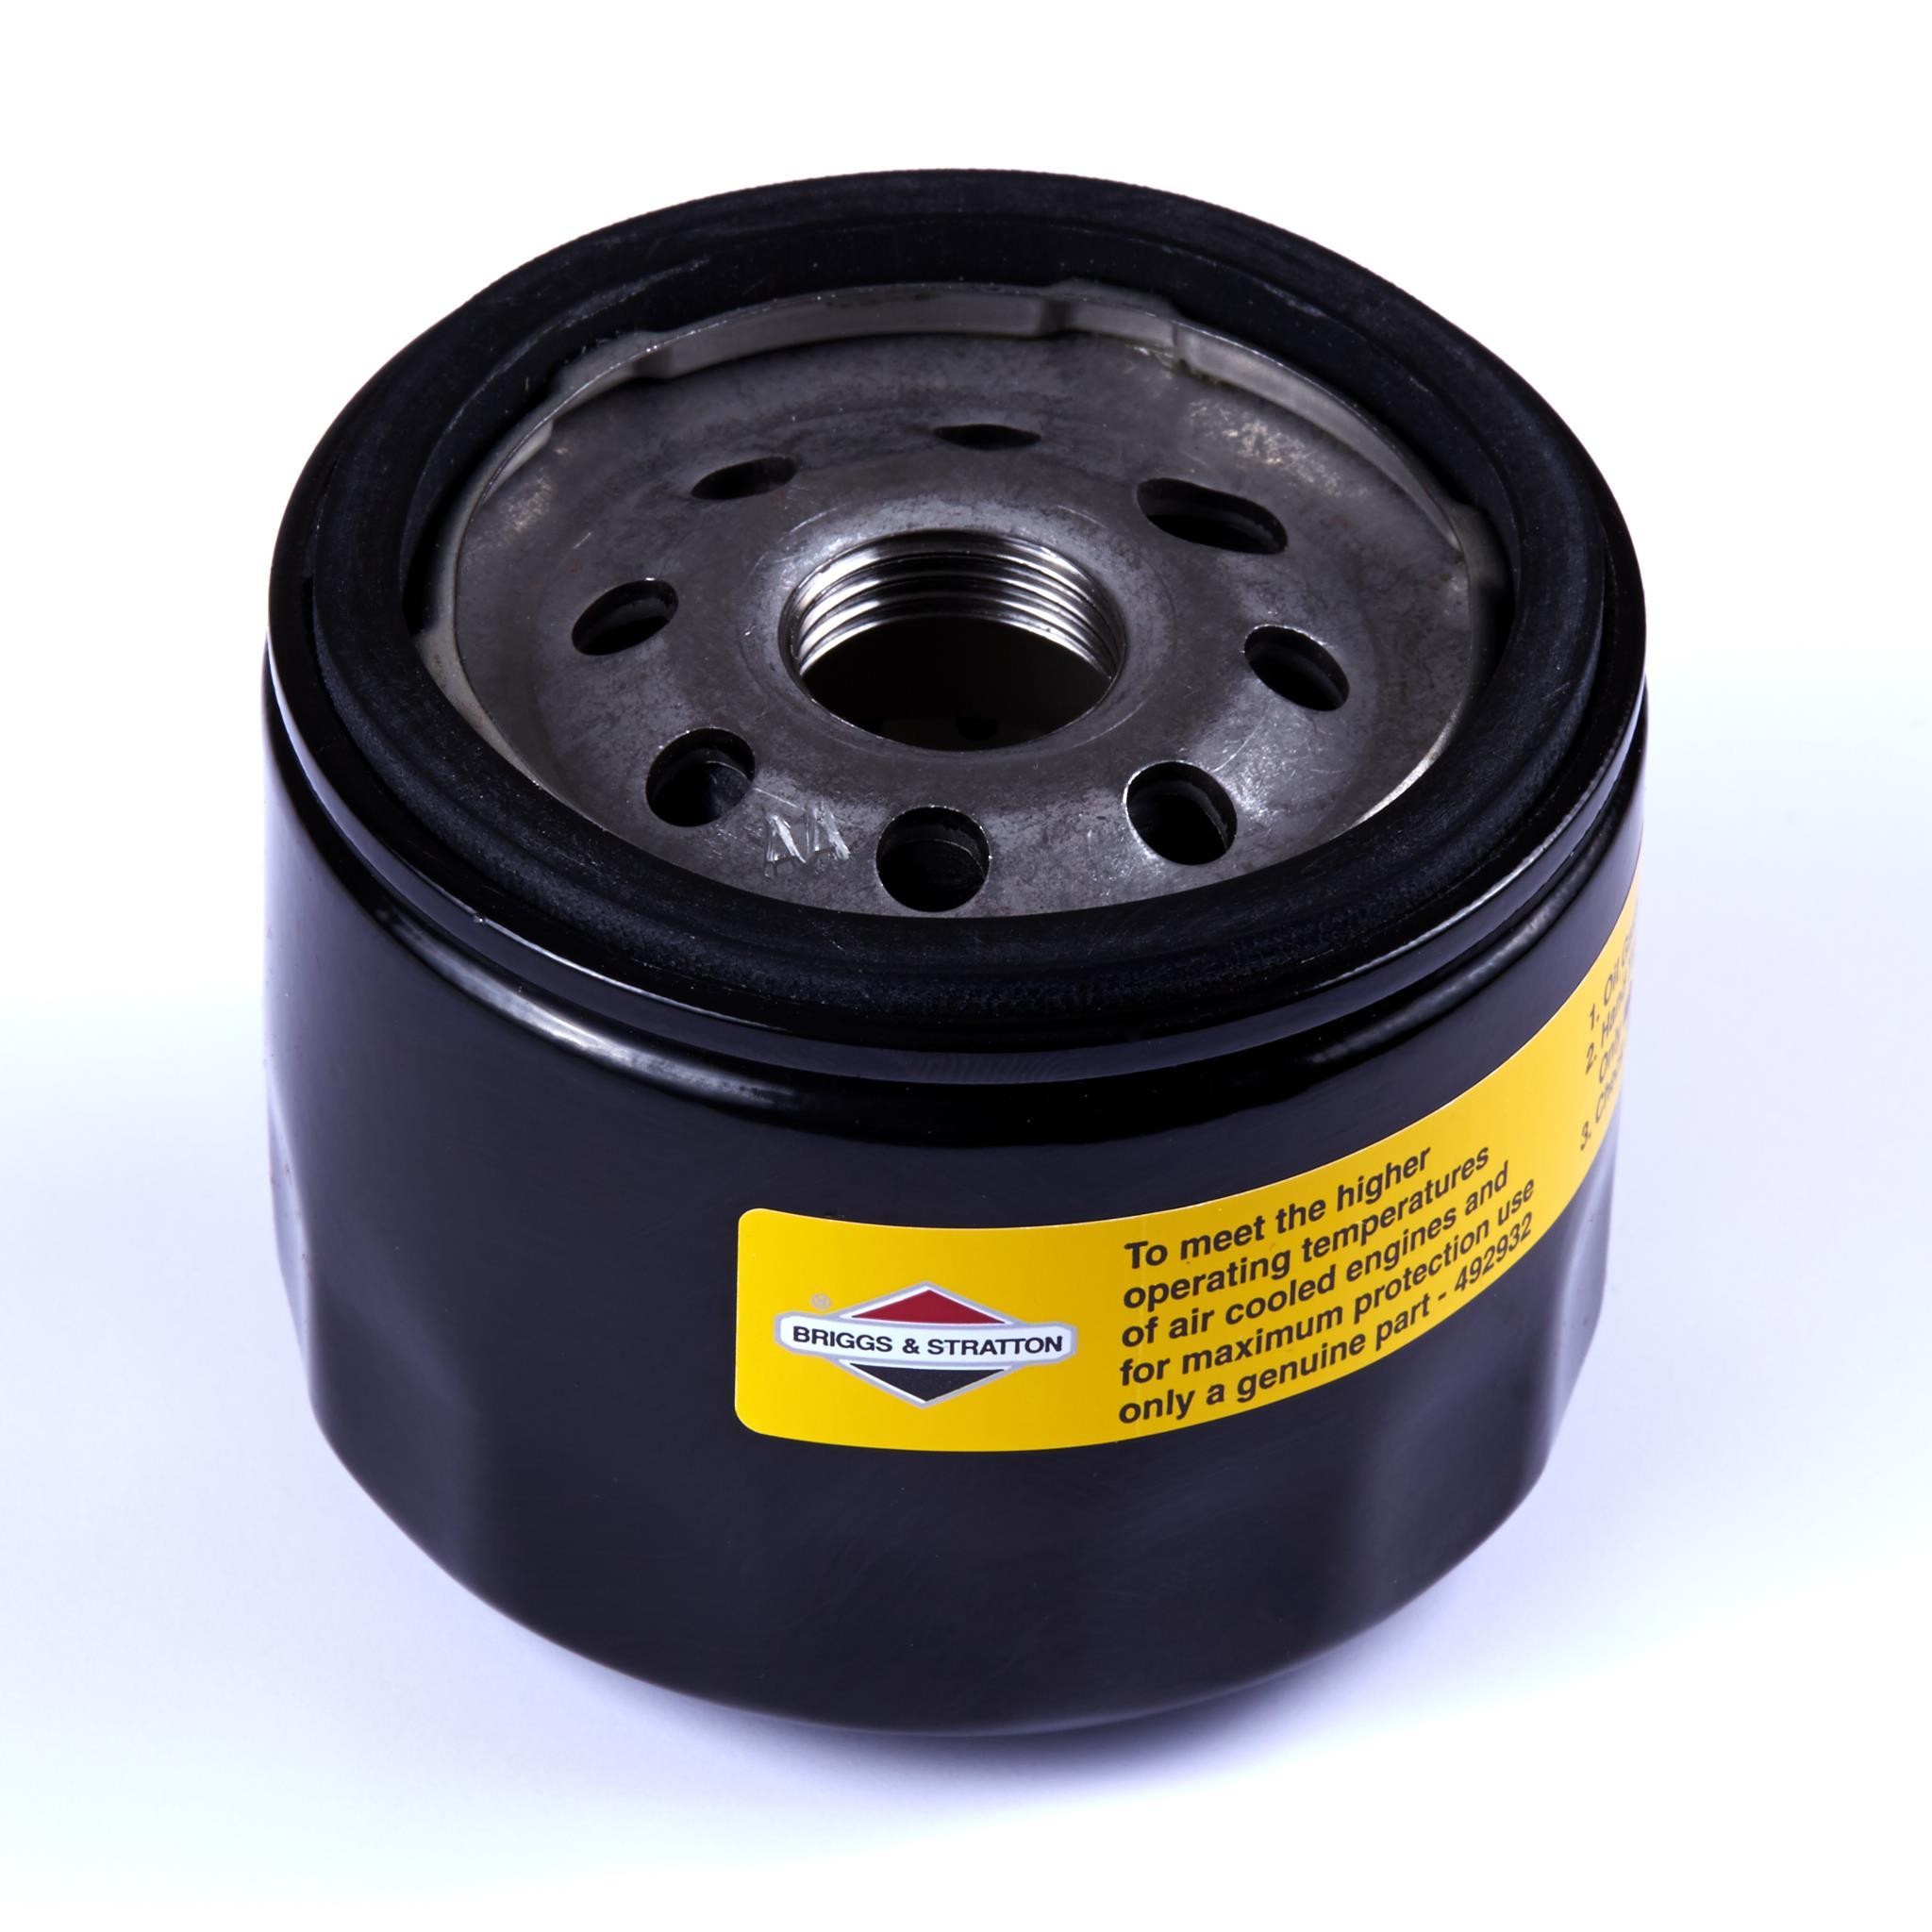 17.5 Briggs and Stratton Parts 2 1 4" Height Standard Oil Filter Of 17.5 Briggs and Stratton Parts